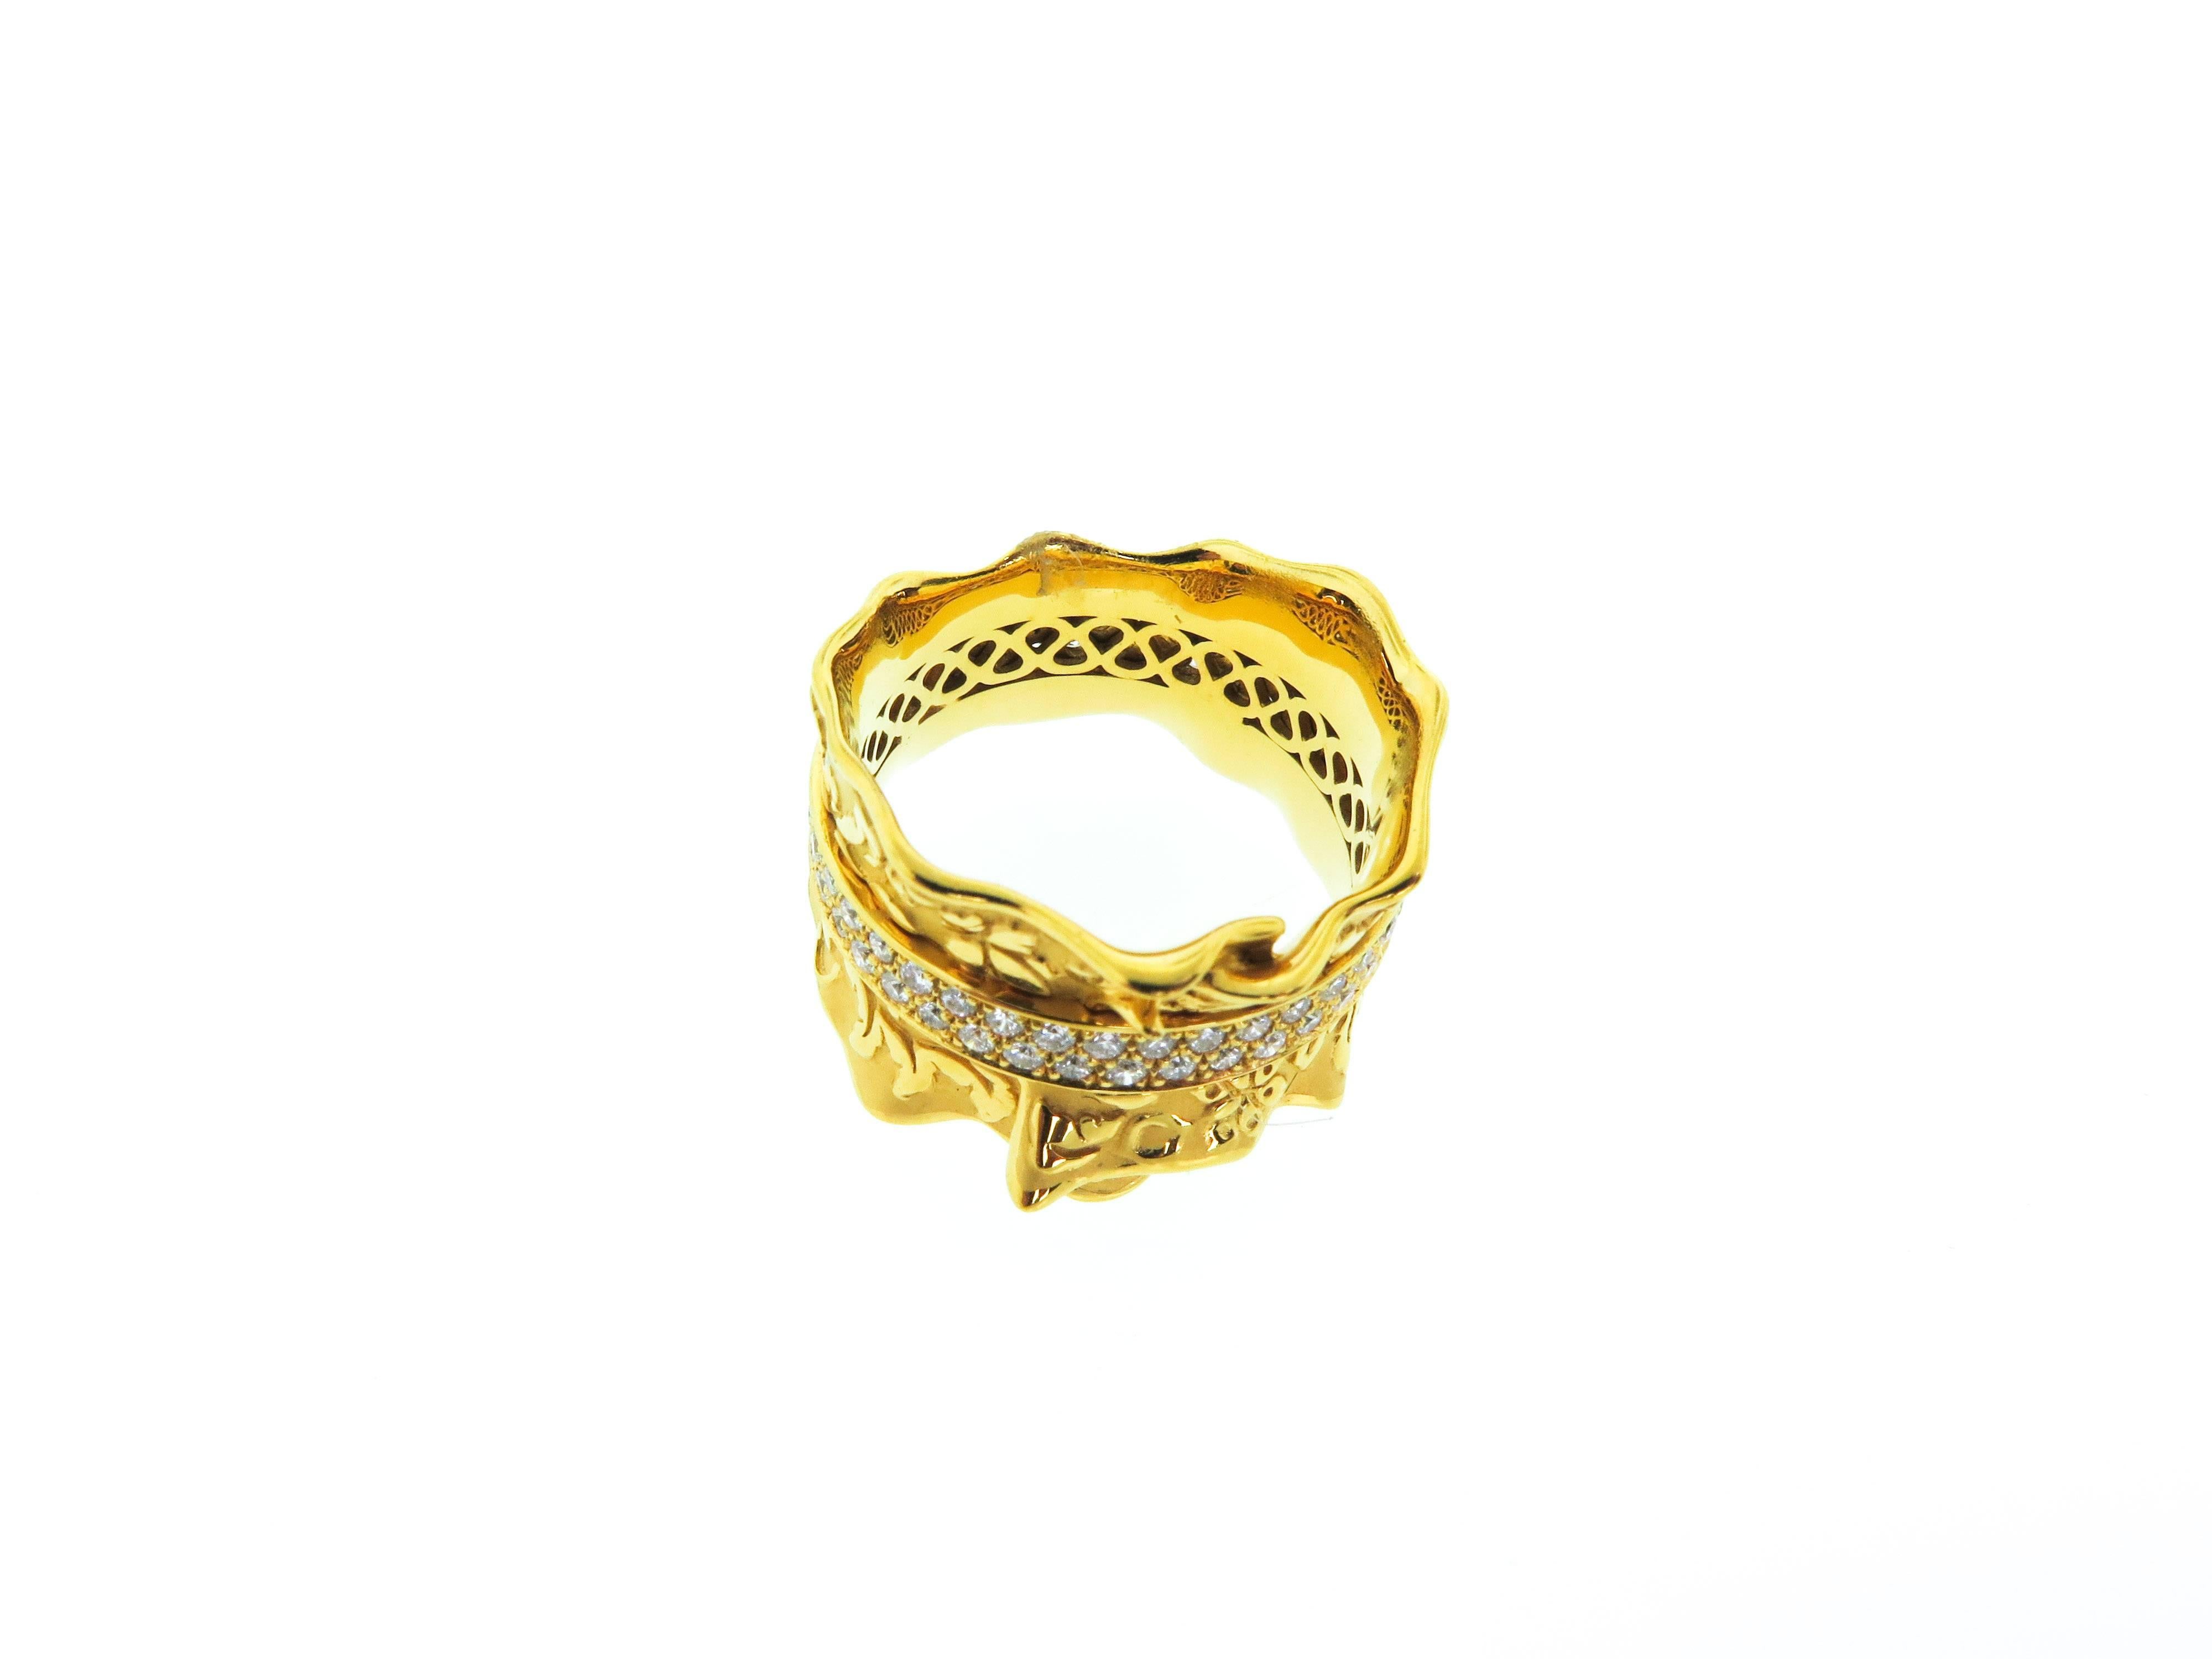 This gorgeous ring is designed by Carrera & Carrera with great originality, the voluminous and serpentine shapes that represent one of the most identifiable symbols of the Spanish Empire: dandy ruffs and lace cuffs. 
Is handcrafted in 18K yellow